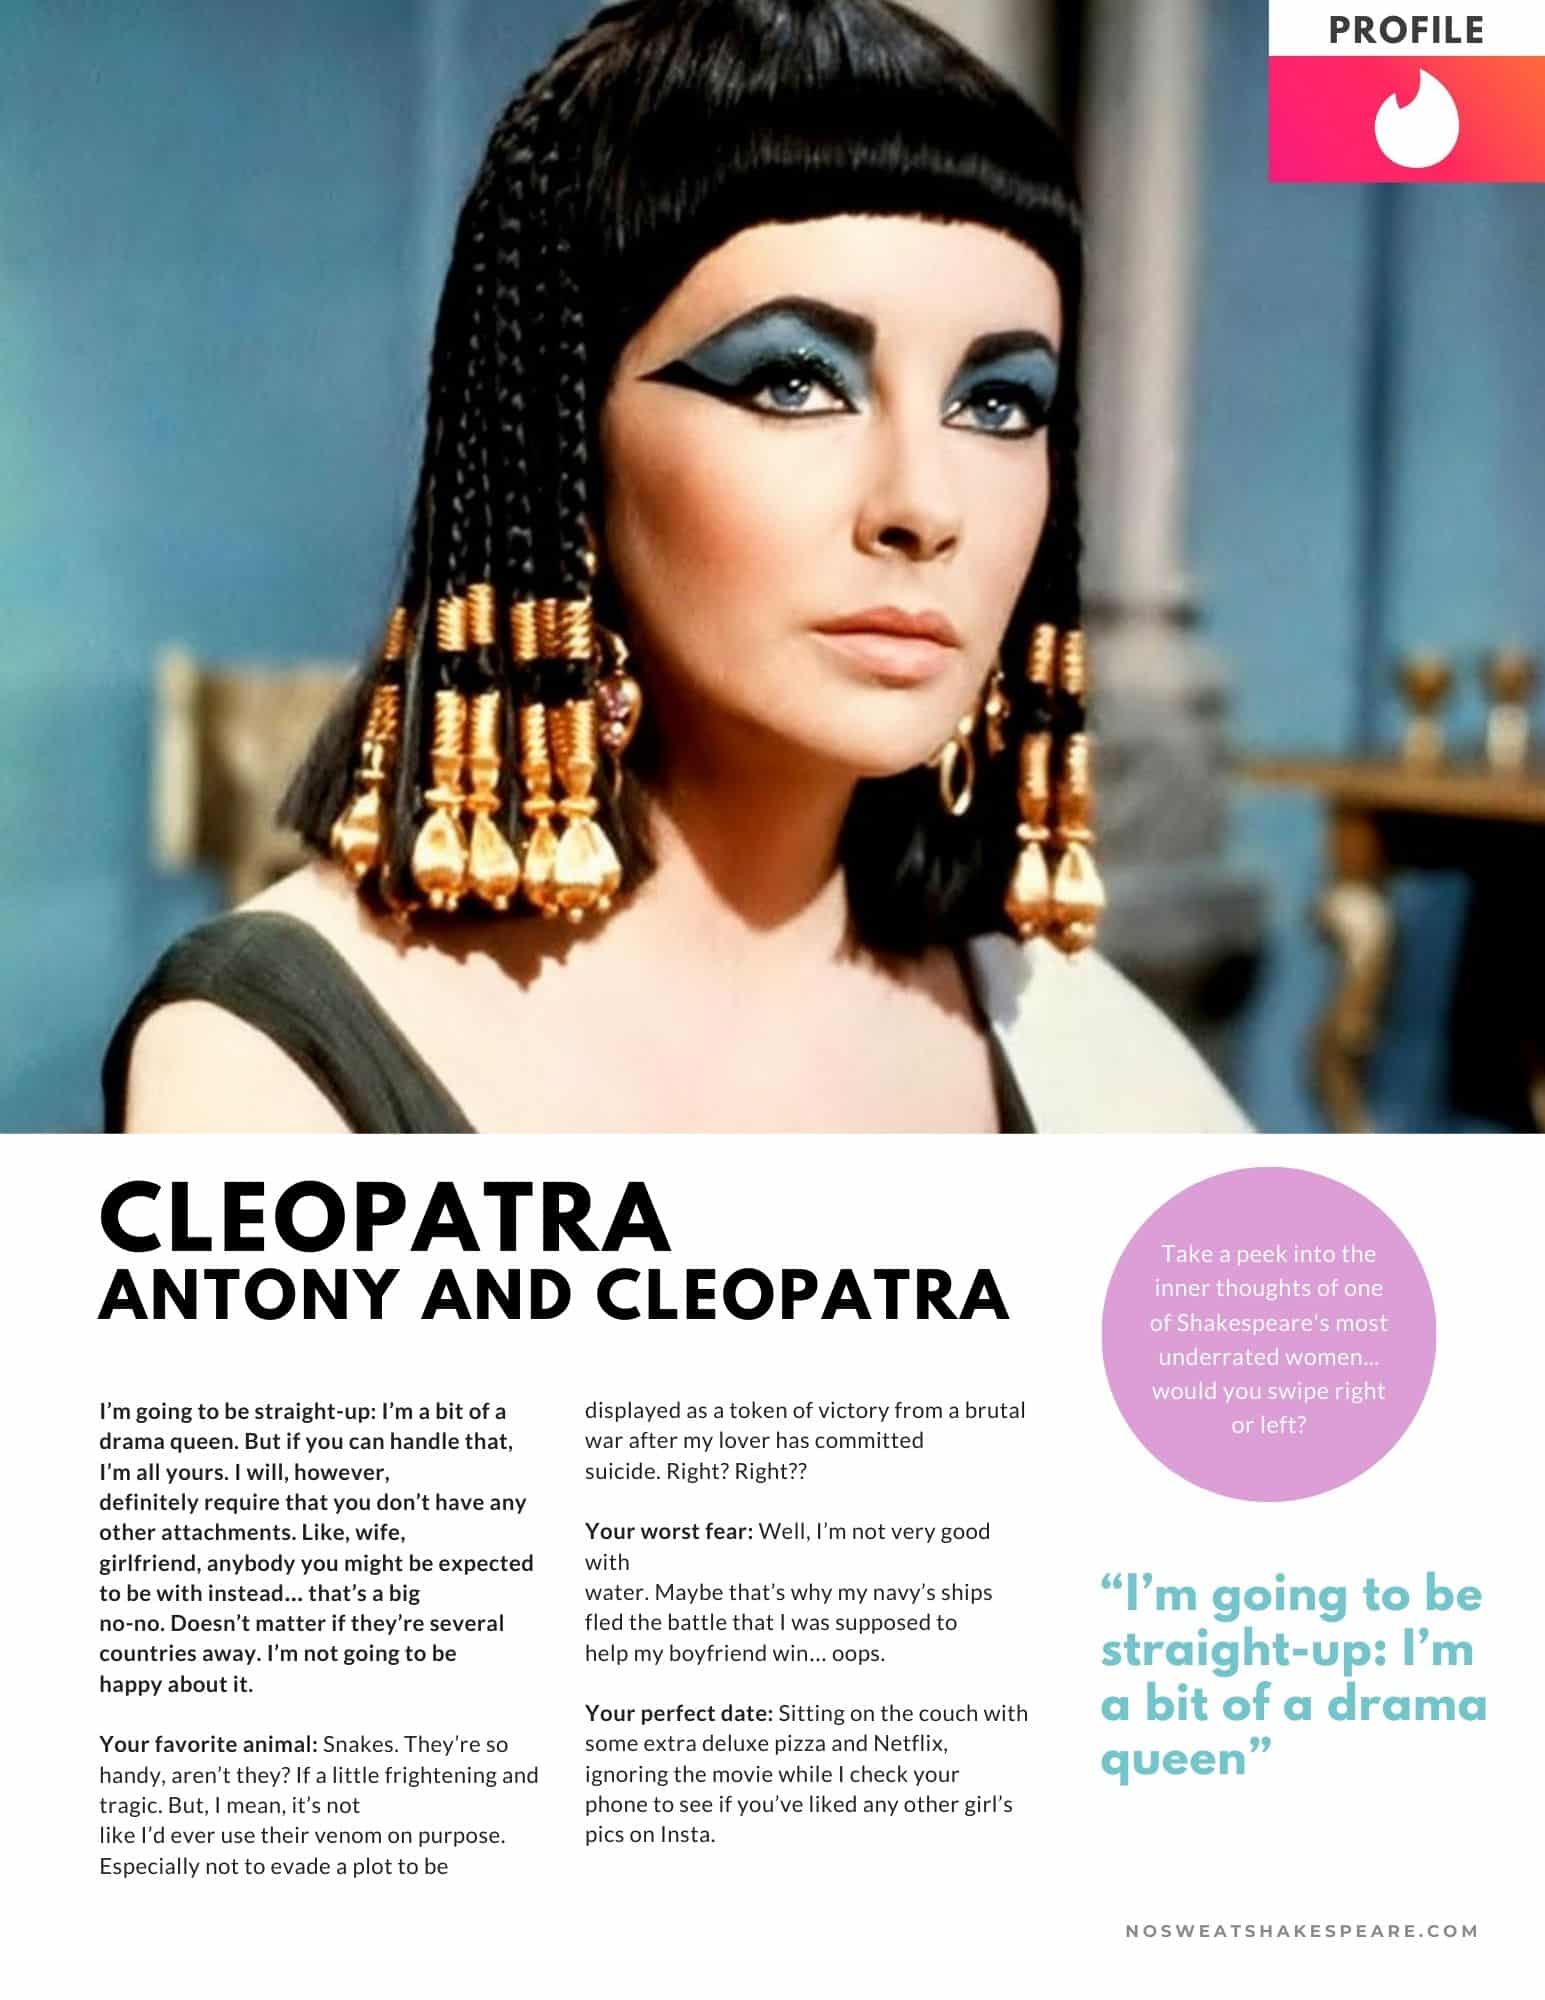 cleopatra dating profile